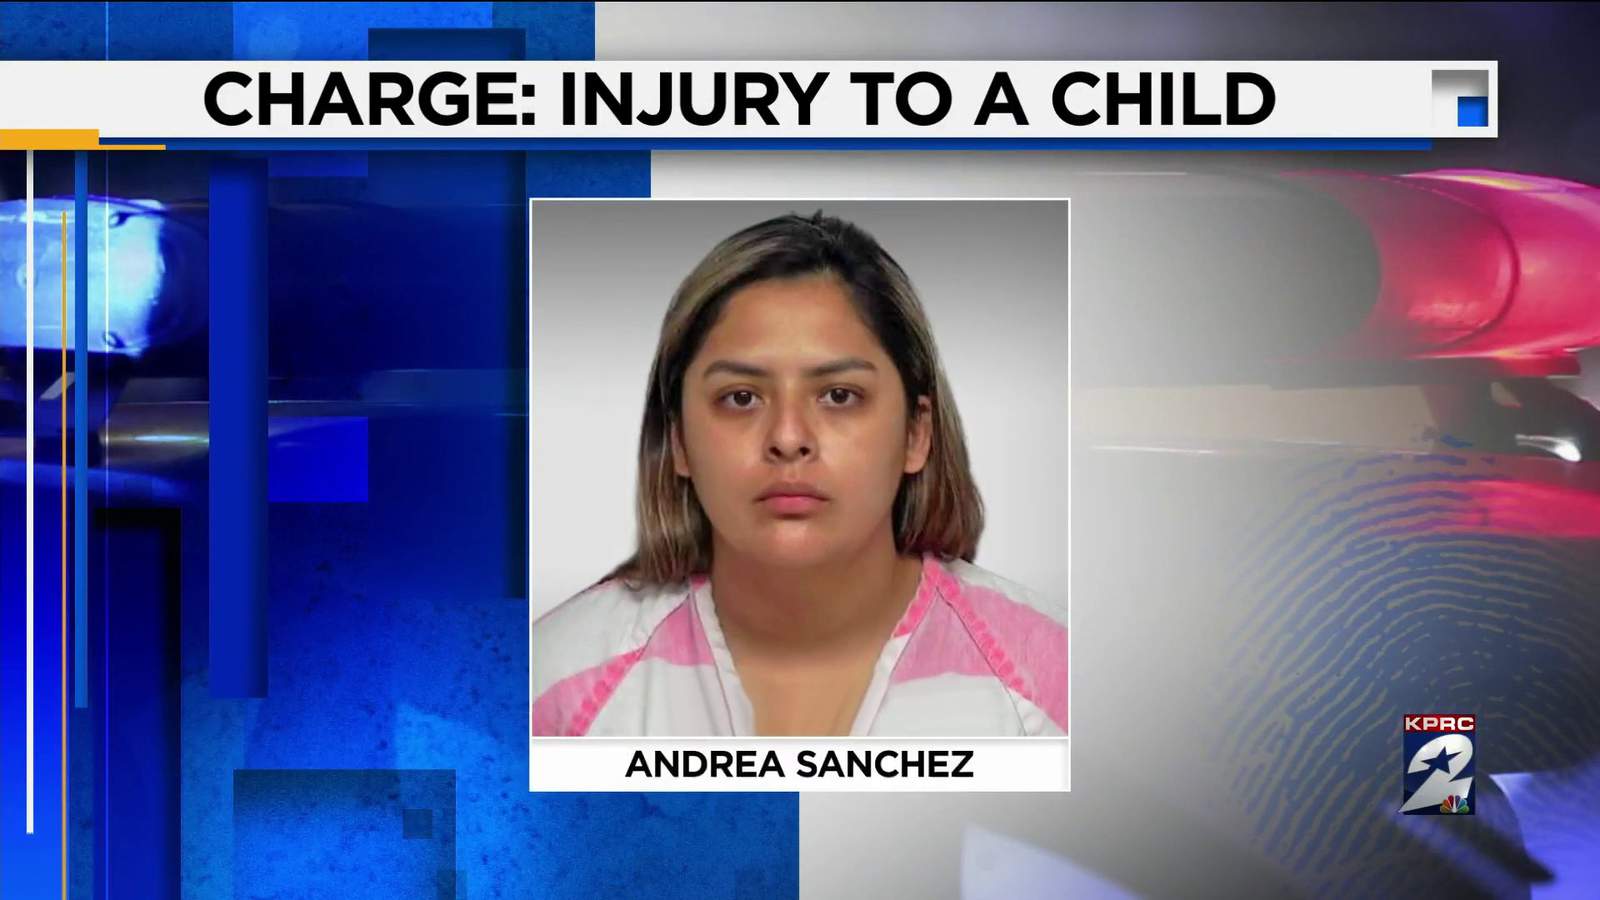 Conroe woman accused of choking 1-year-old baby at her unlicensed daycare, police say